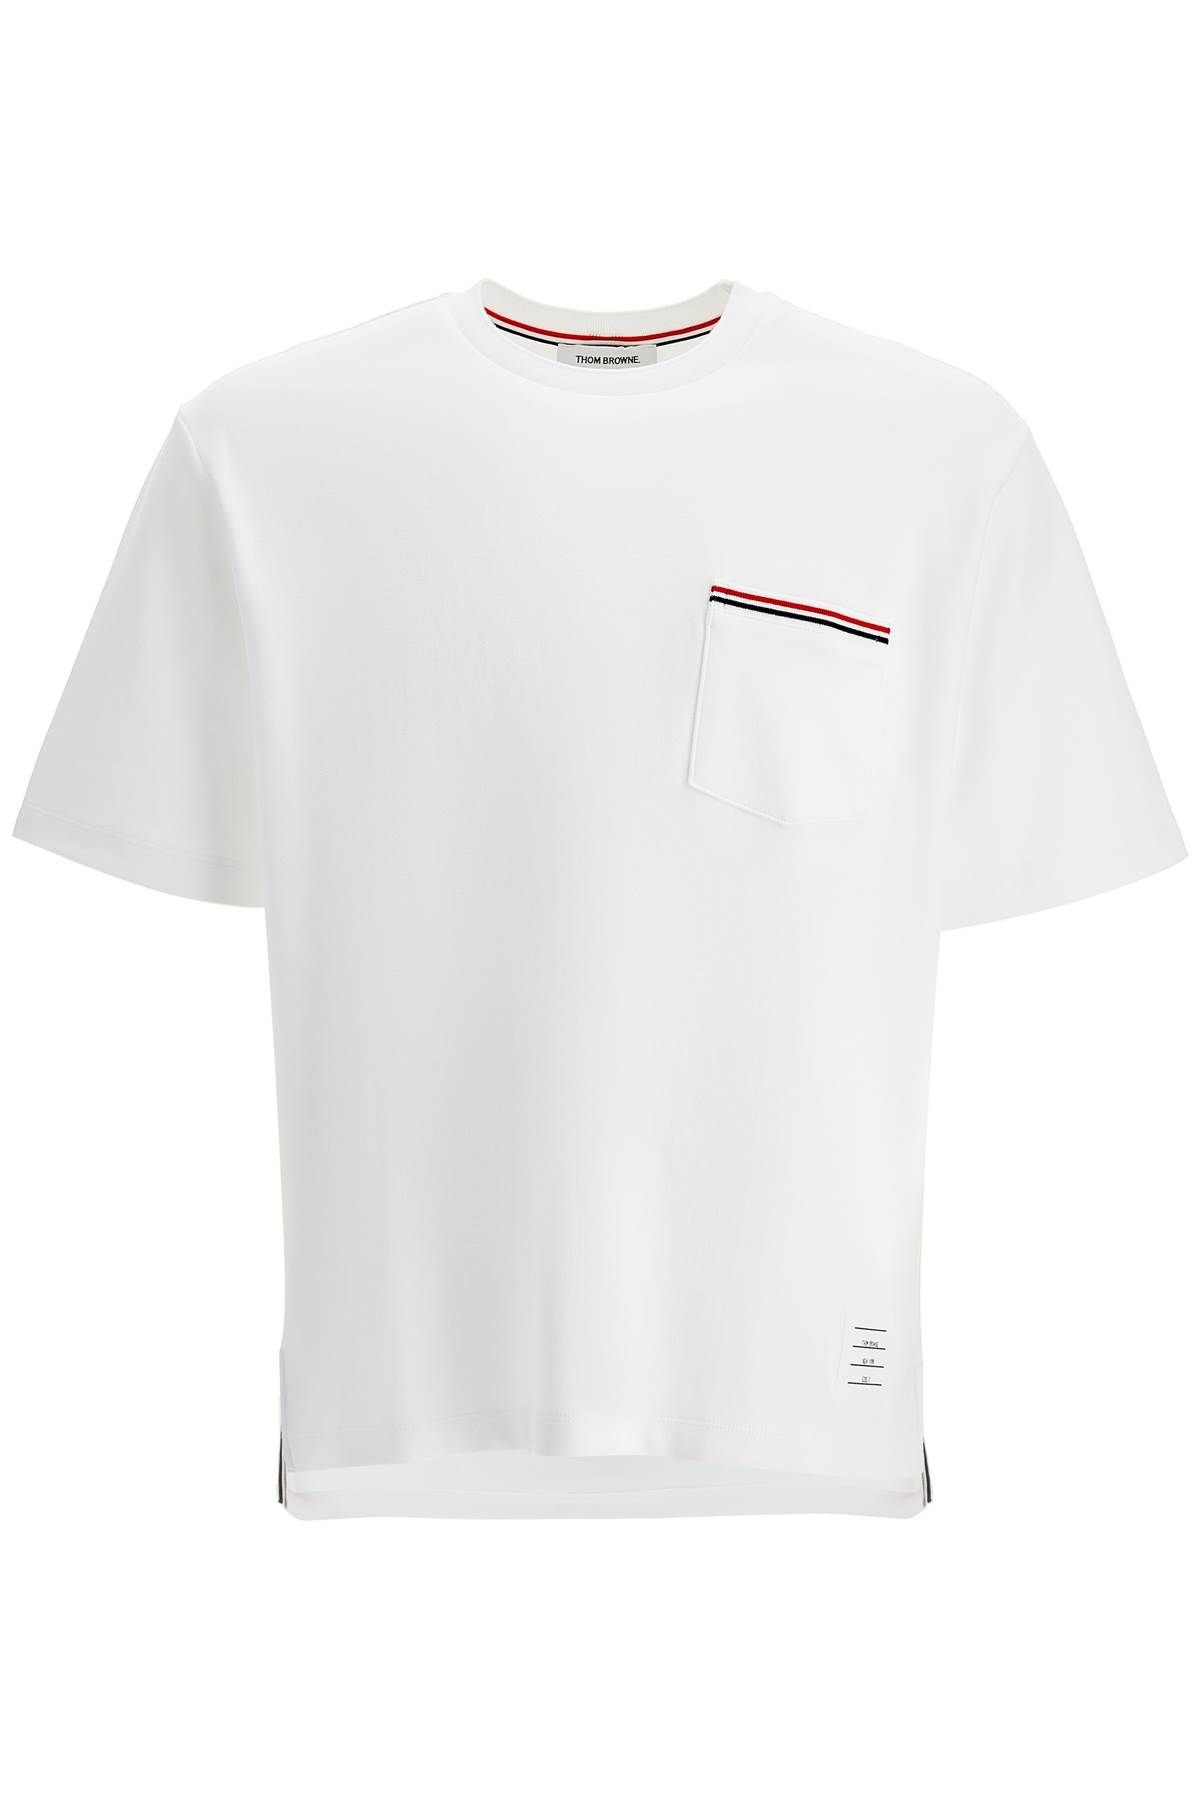 Thom Browne THOM BROWNE oversized t-shirt with